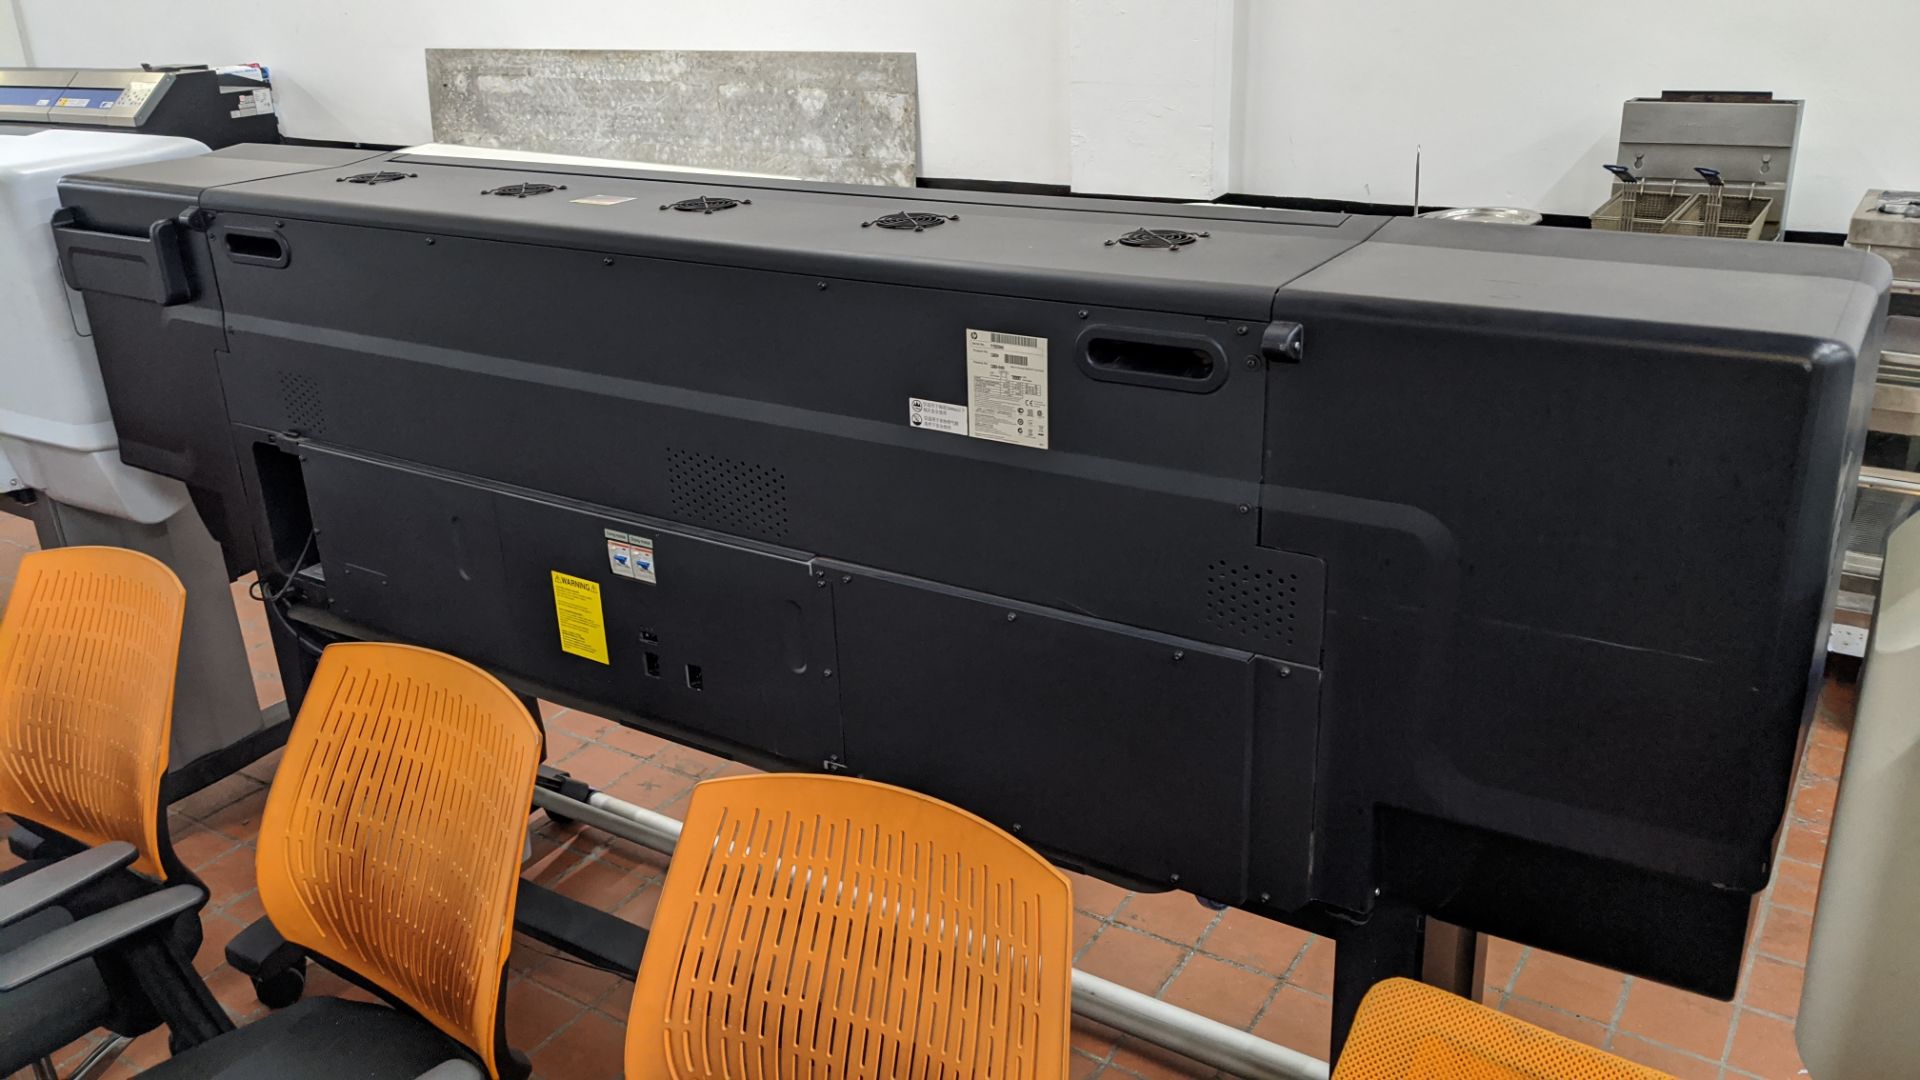 HP latex 260 (HP DesignJet L26500) wide format printer, product number CQ869A (61" capacity). - Image 2 of 9